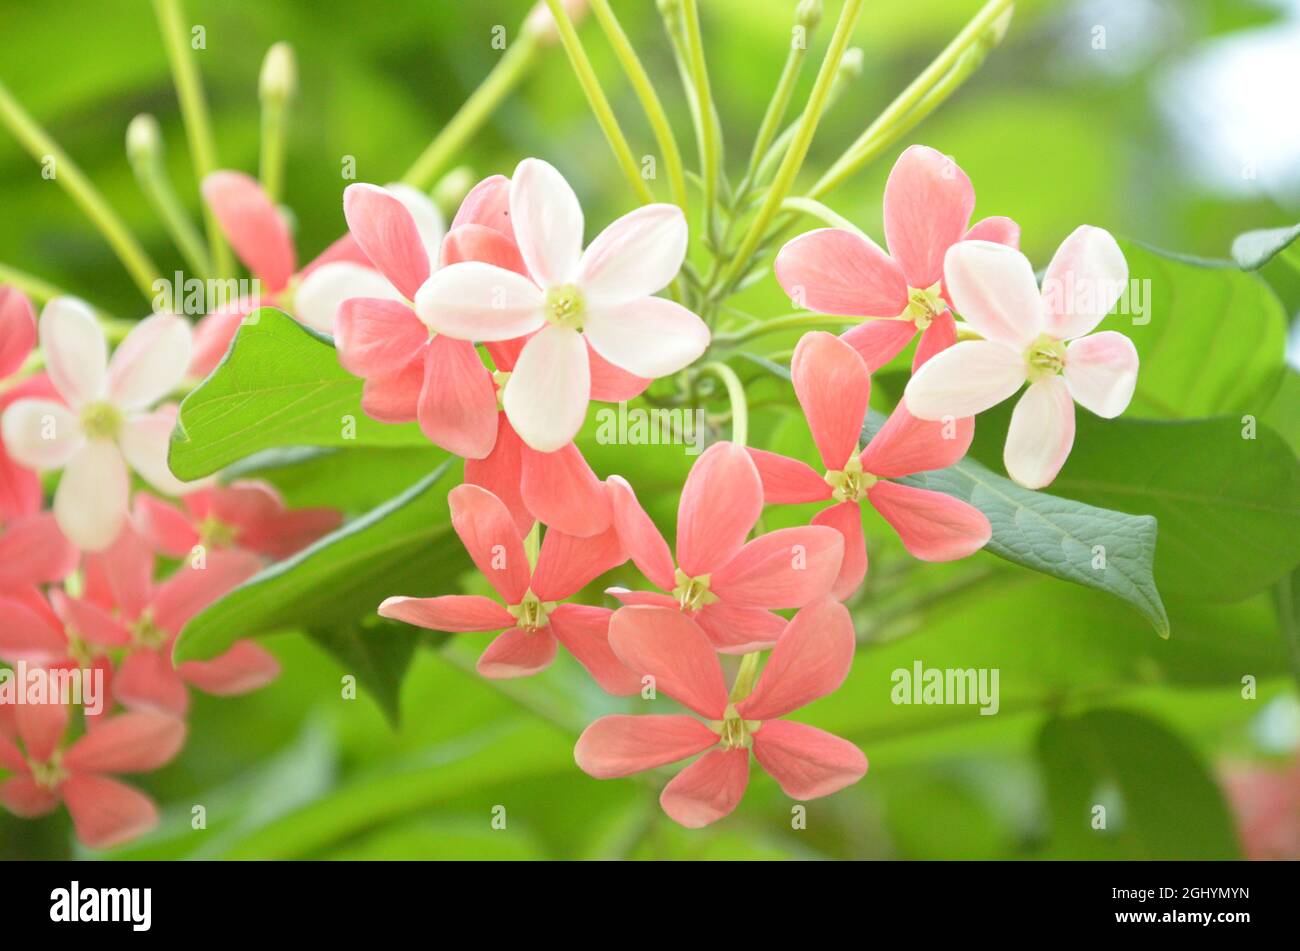 CLOSE UP VIEW OF RED AND WHITE COMBRETUM INDICUM FLOWERS WITH GREEN LEAVES ISOLATED WITH GREEN BLUR BACKGROUND IN PARK IN MORNING SUN LIGHT. Stock Photo